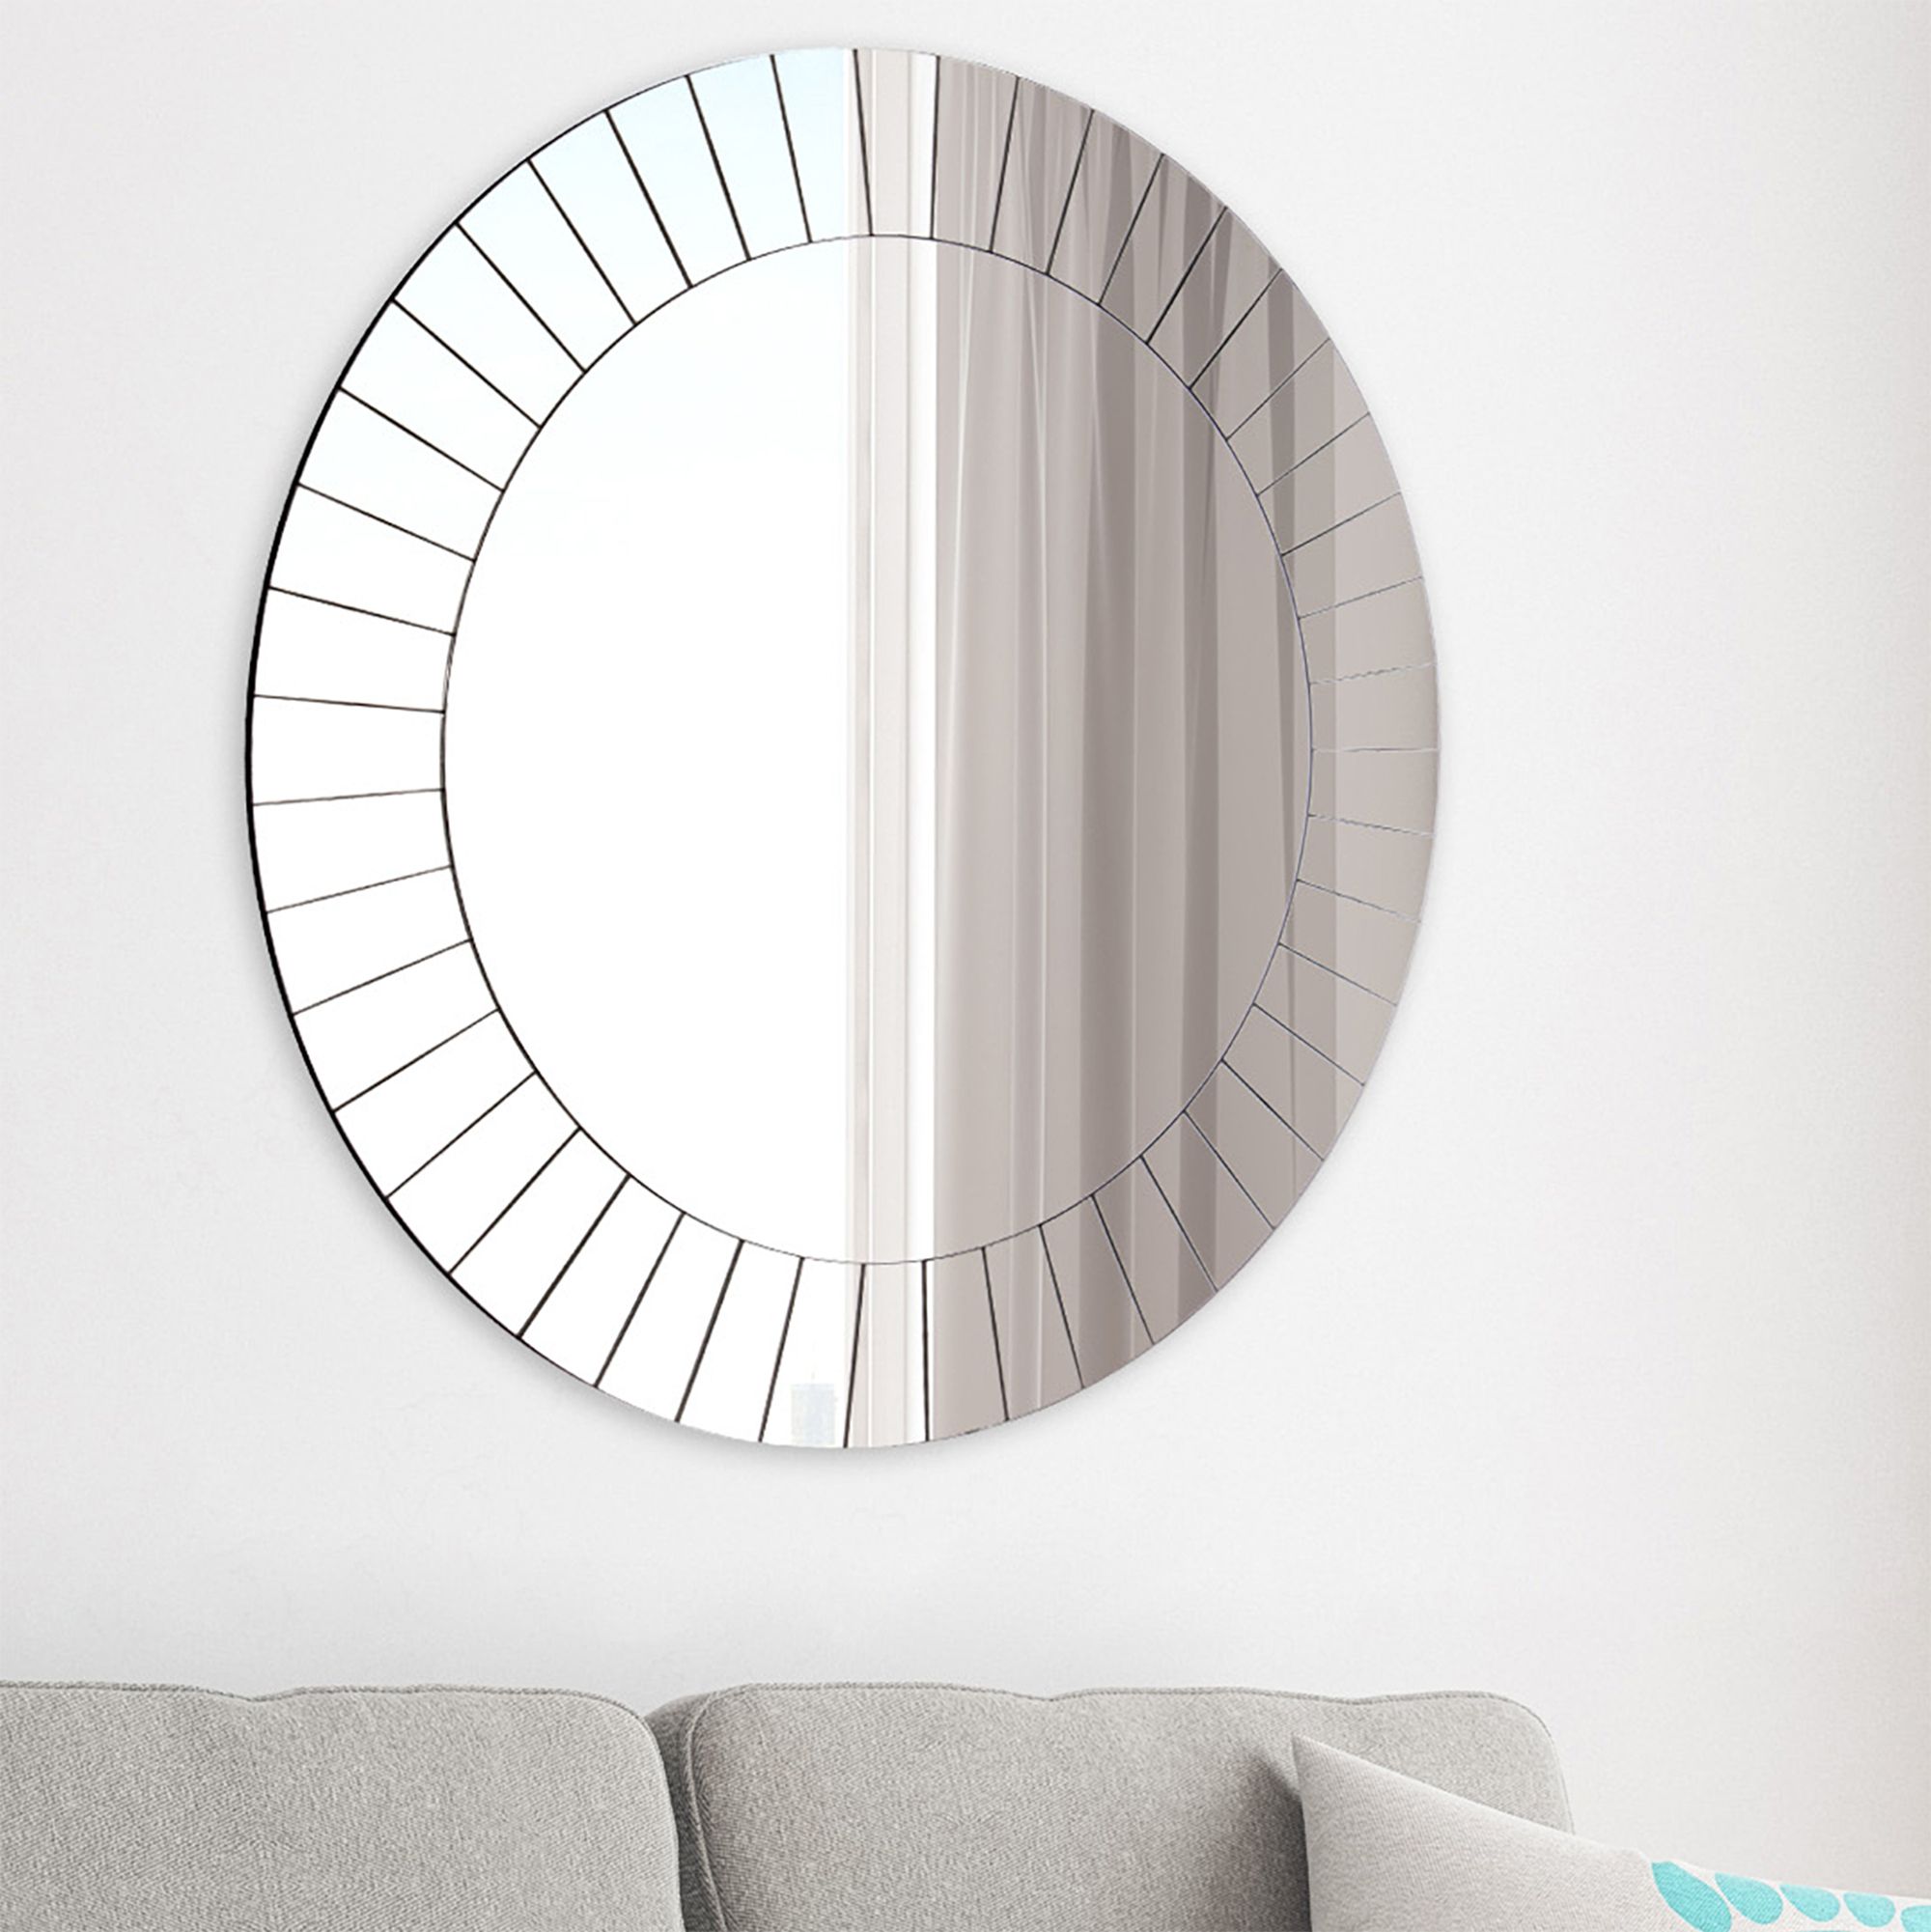 Frameless Beveled Round Wall Mirror 26"X26"Gallery Solutions With Regard To Cut Corner Wall Mirrors (View 5 of 15)